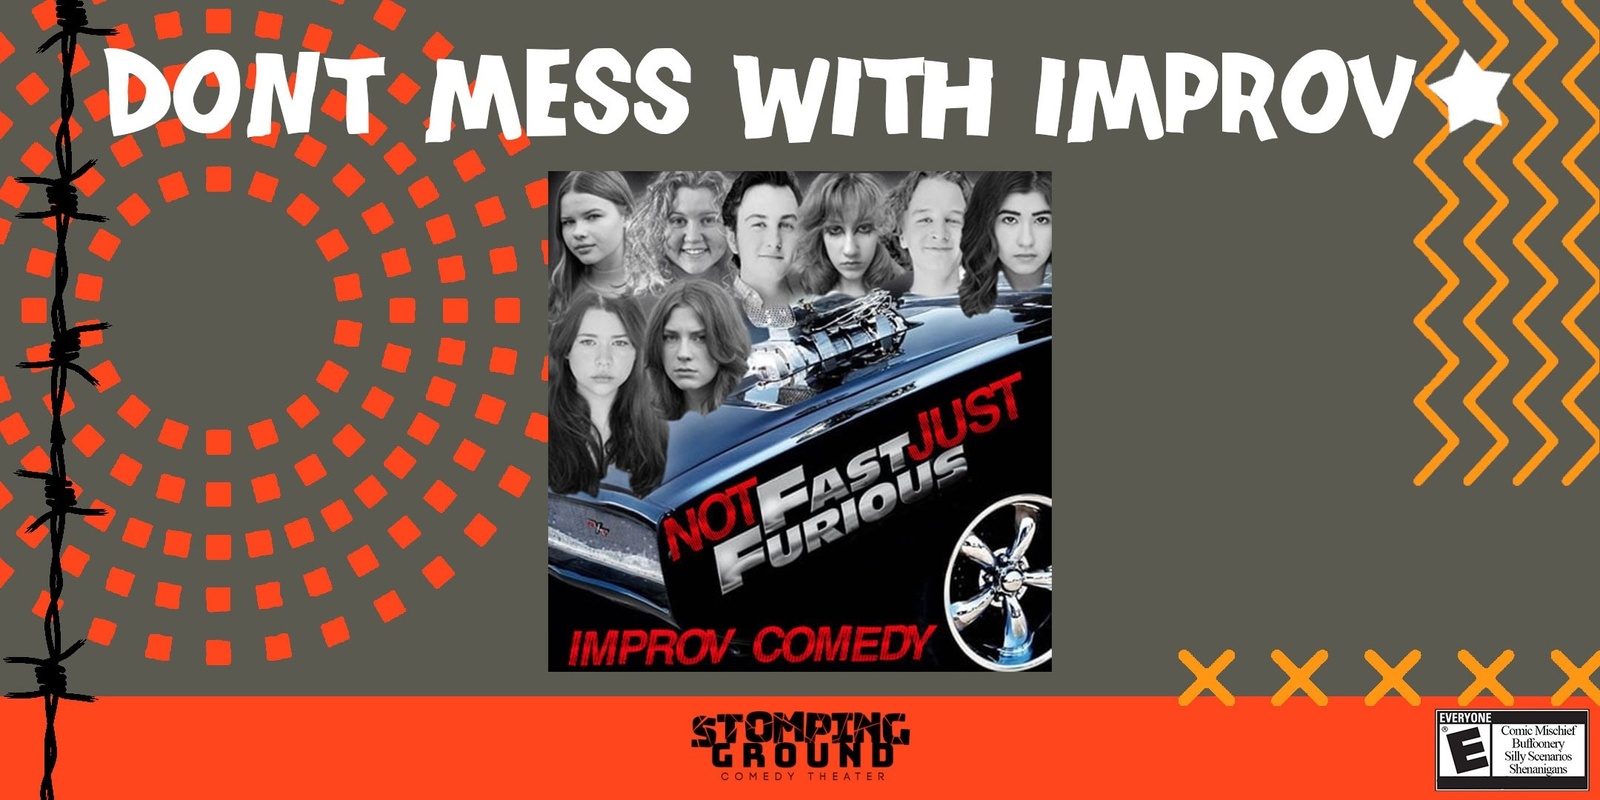 Banner image for Don't Mess with Improv featuring Not Fast Just Furious